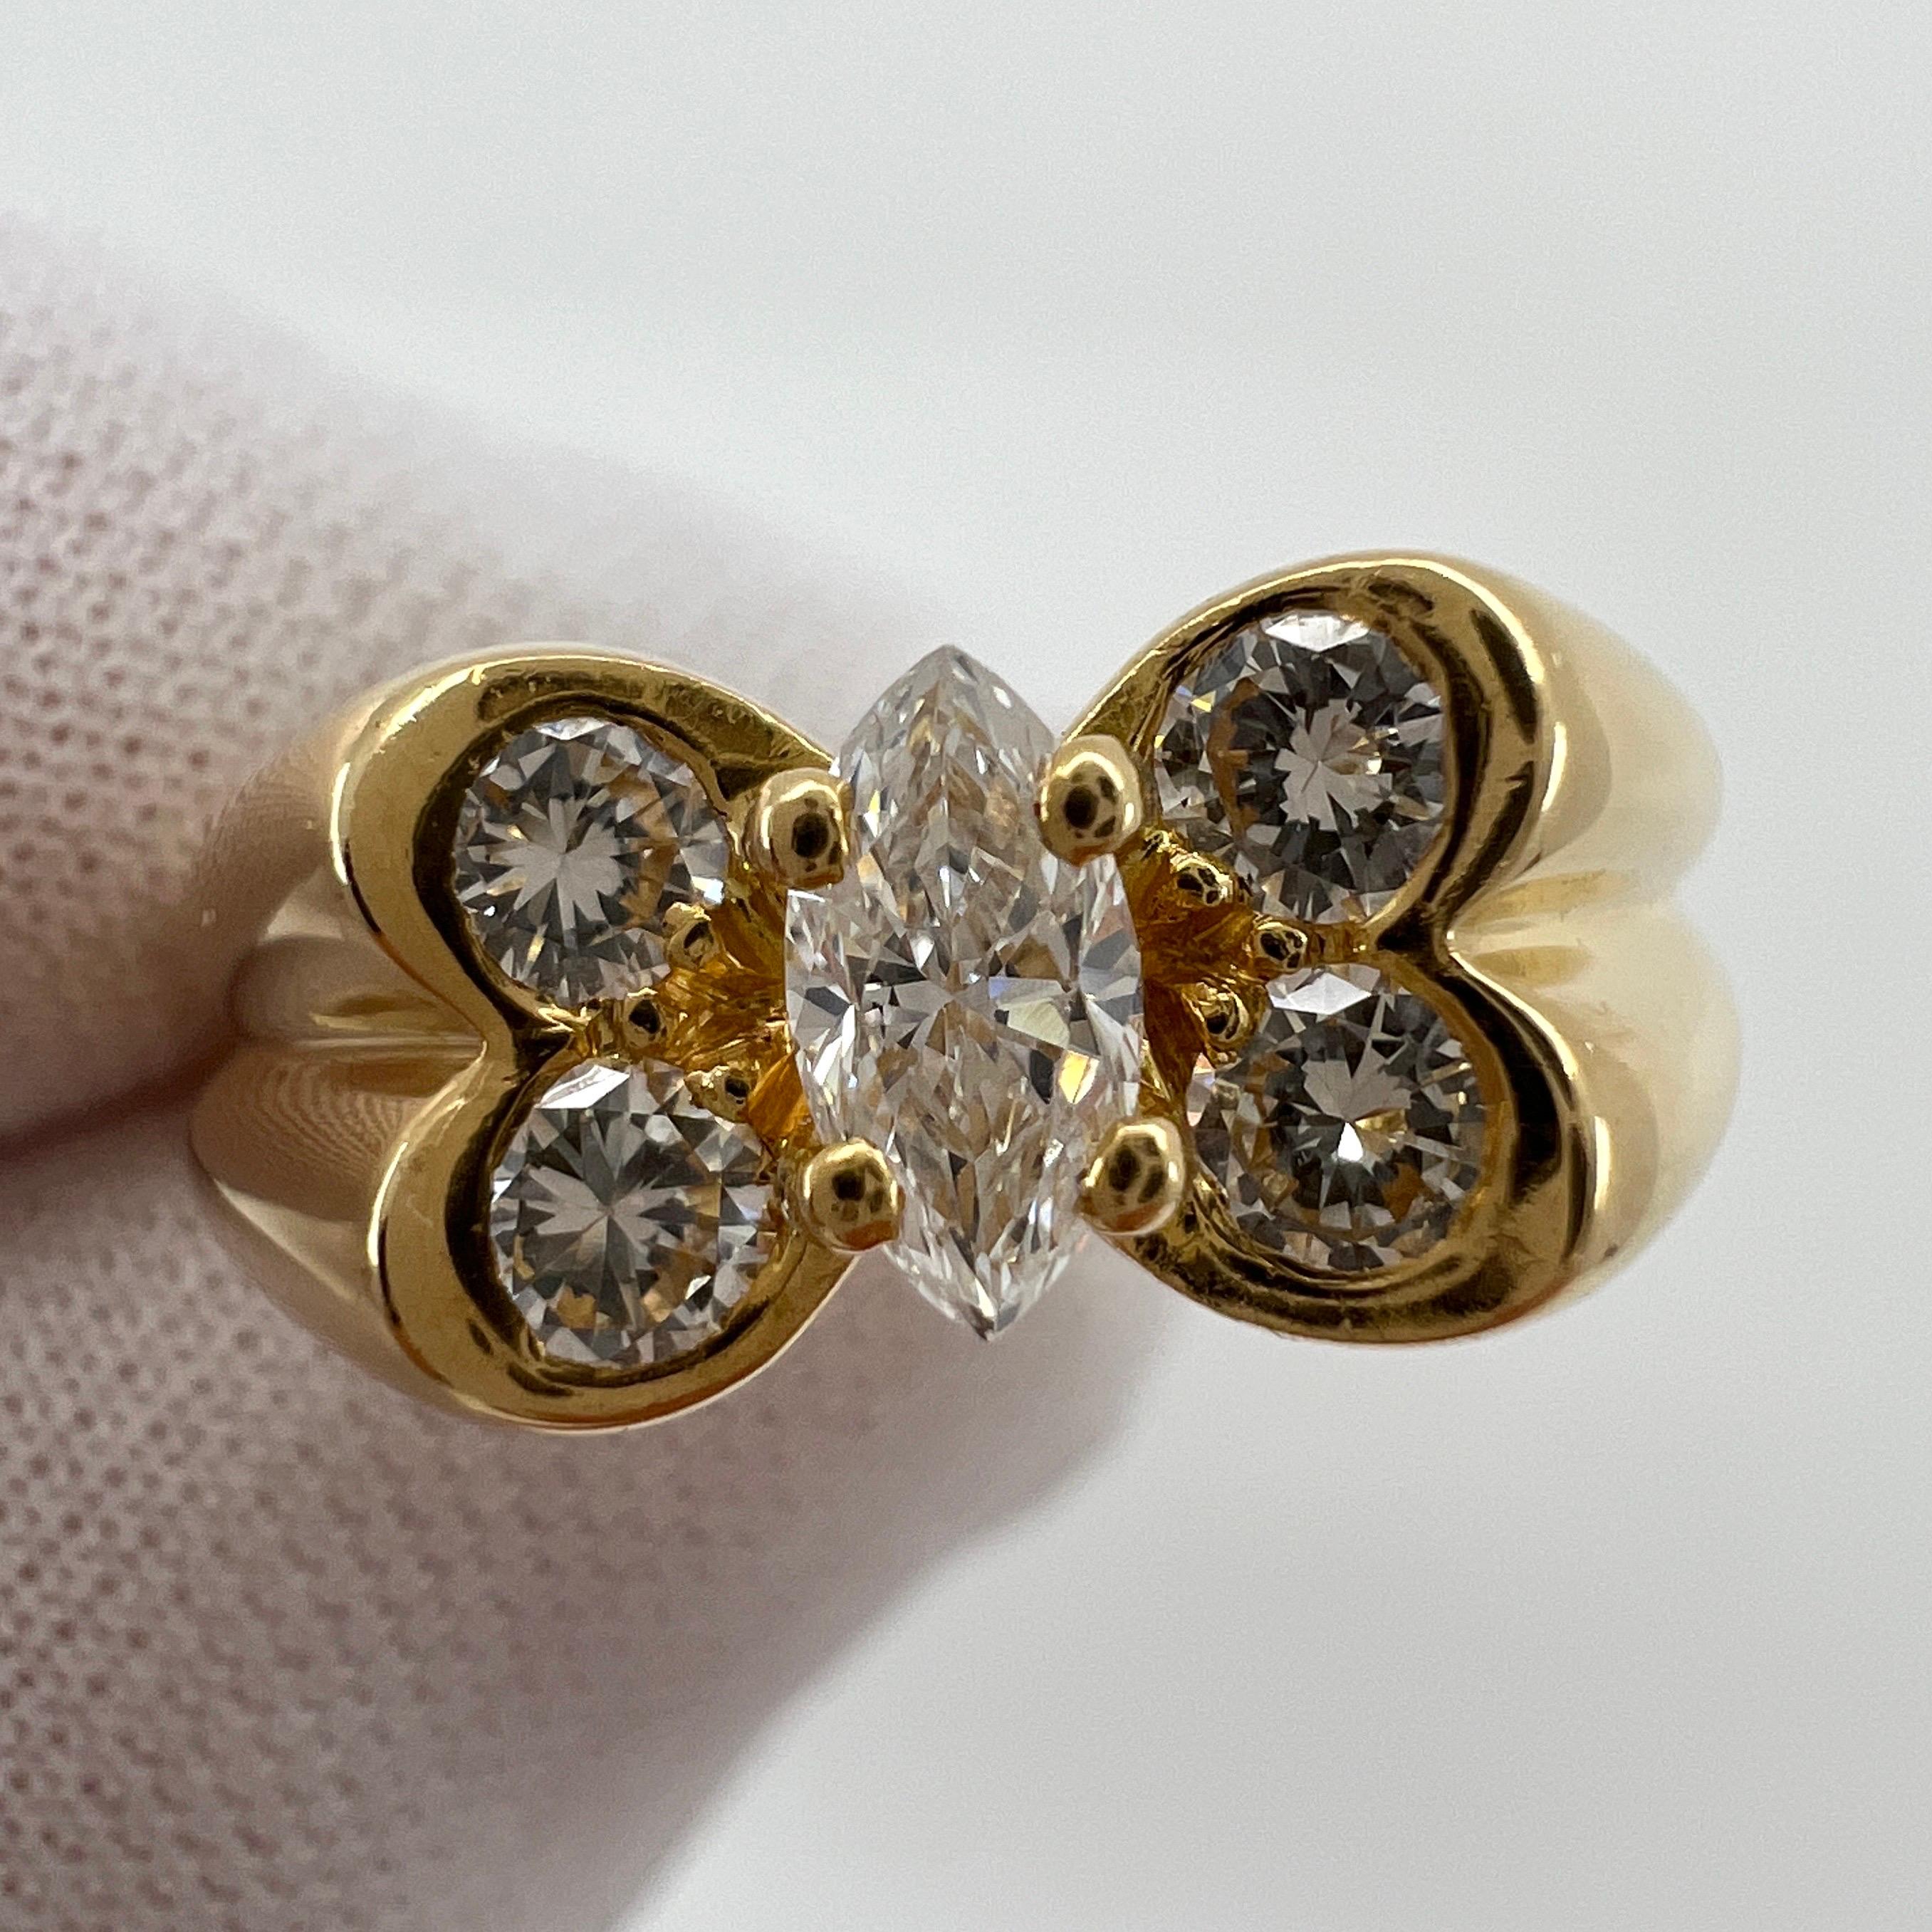 Rare Vintage Van Cleef & Arpels Diamond 18k Yellow Gold Ring.

A stunning vintage ring with a unique design typical of Van Cleef & Arpels, set with approx. 0.50ct of fine quality white diamonds. The centre stone being a beautiful marquise/navette